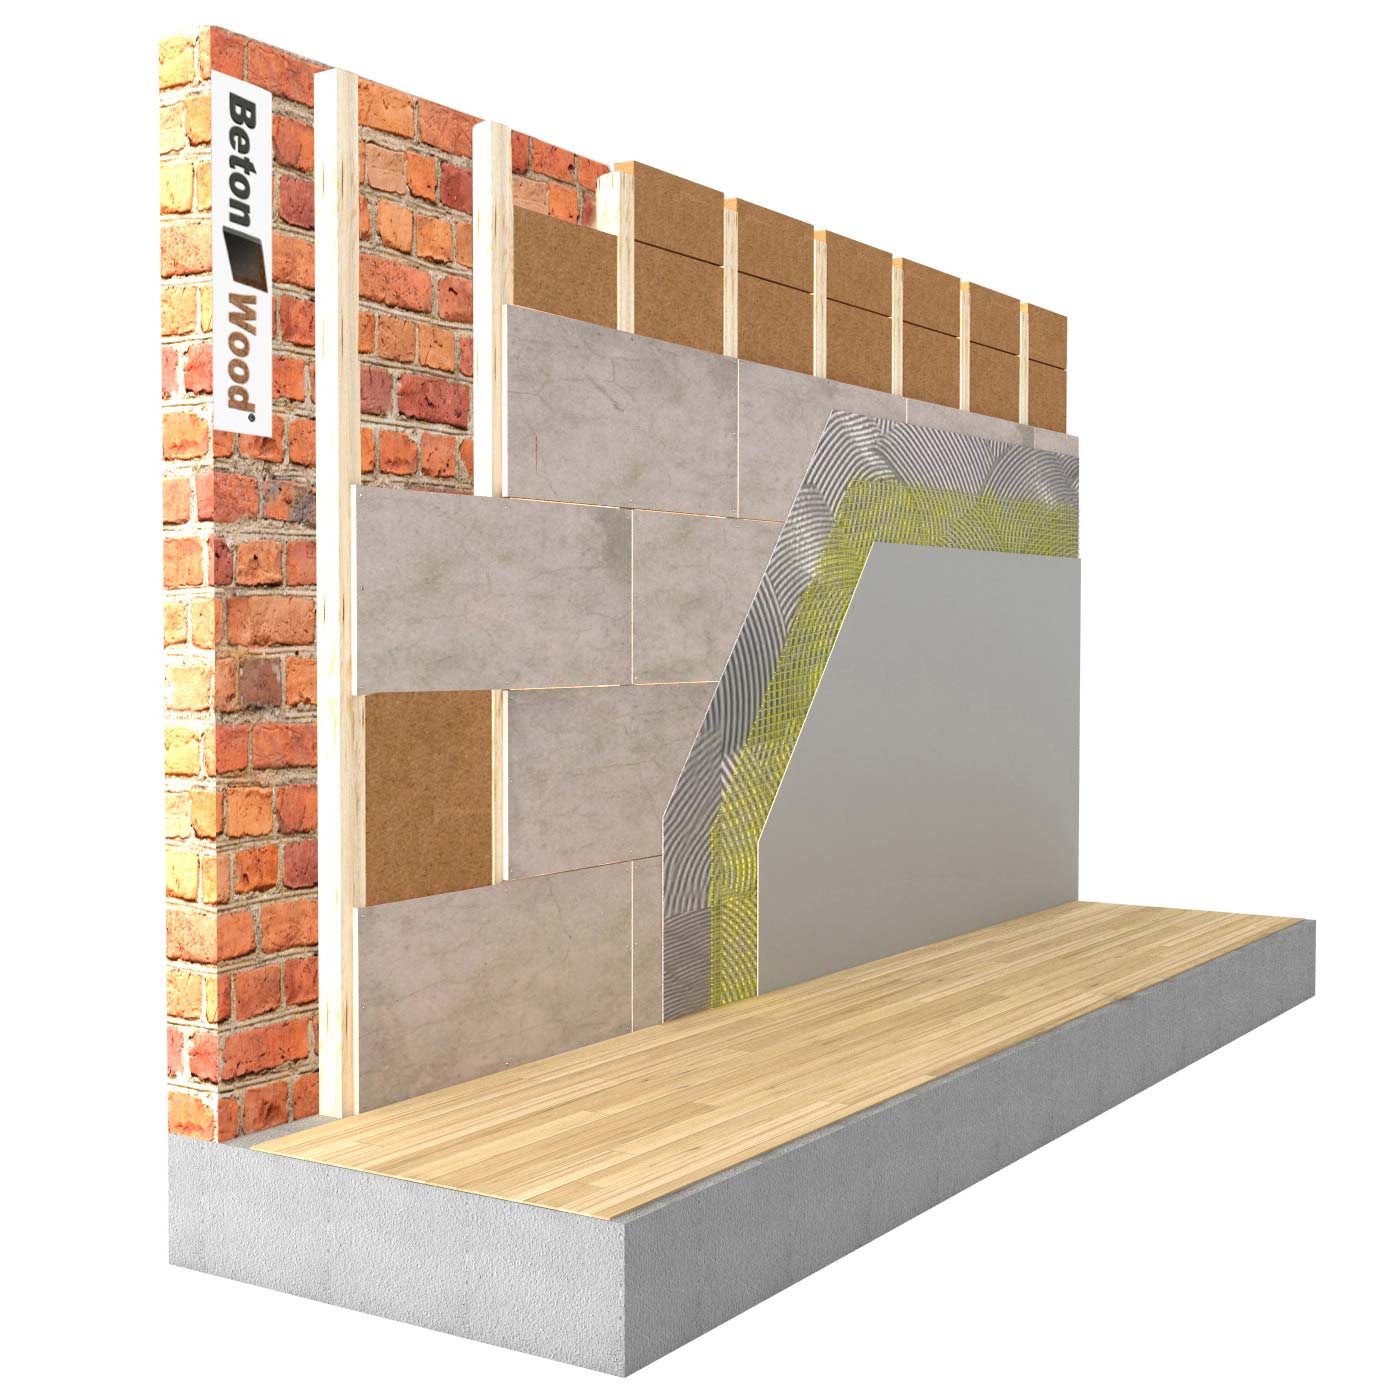 Internal Insulation Systems With Wood Fibre Board